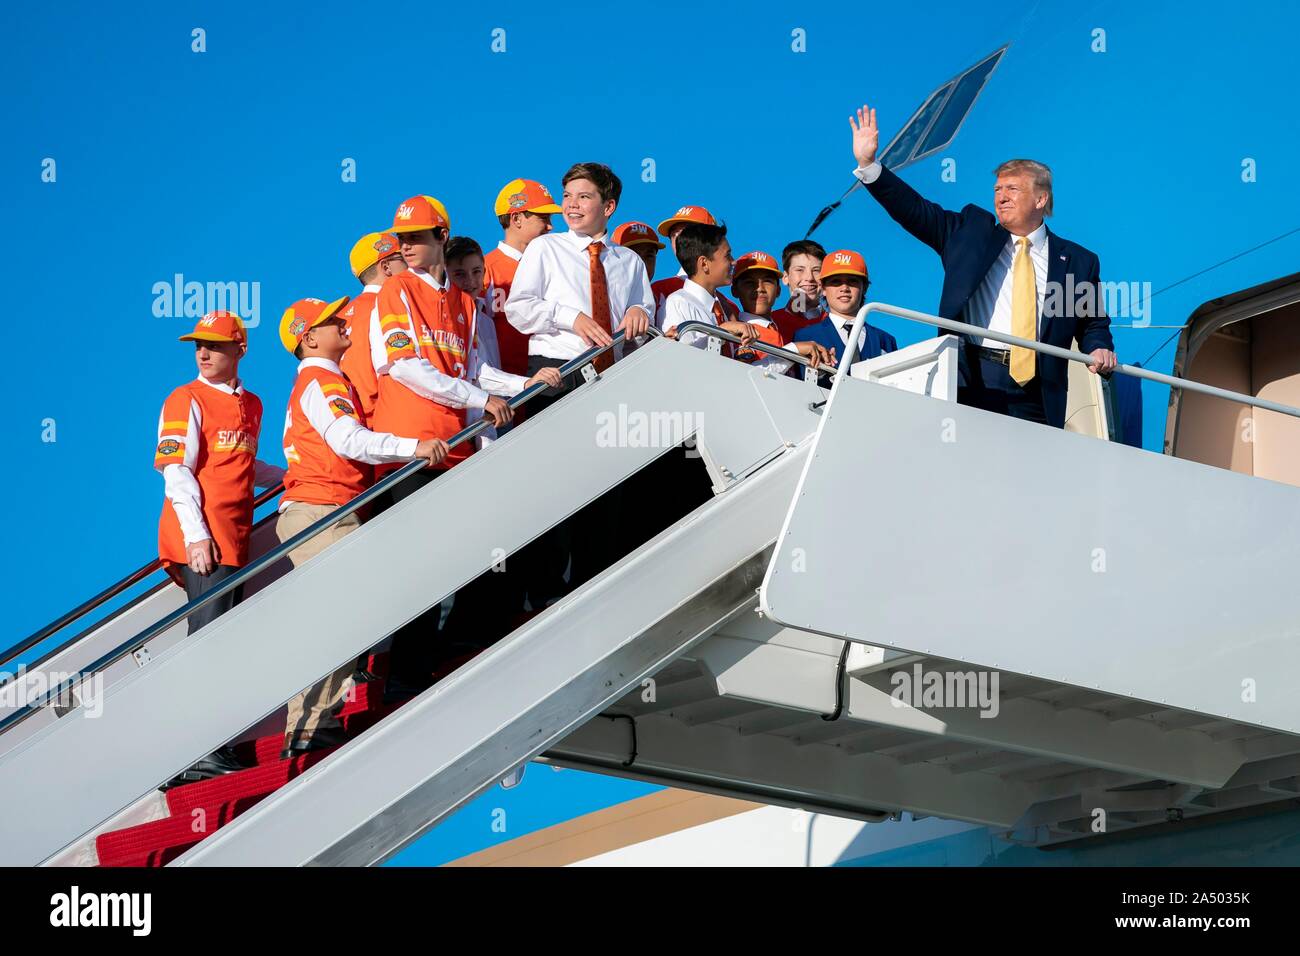 U.S President Donald Trump waves as he boards Air Force One with members of the Little League World Series champs Eastbank All-Stars little league baseball team from Louisiana at Joint Base Andrews October 11, 2019 in Clinton, Maryland. The president is giving the team a ride home aboard Air Force One. Stock Photo